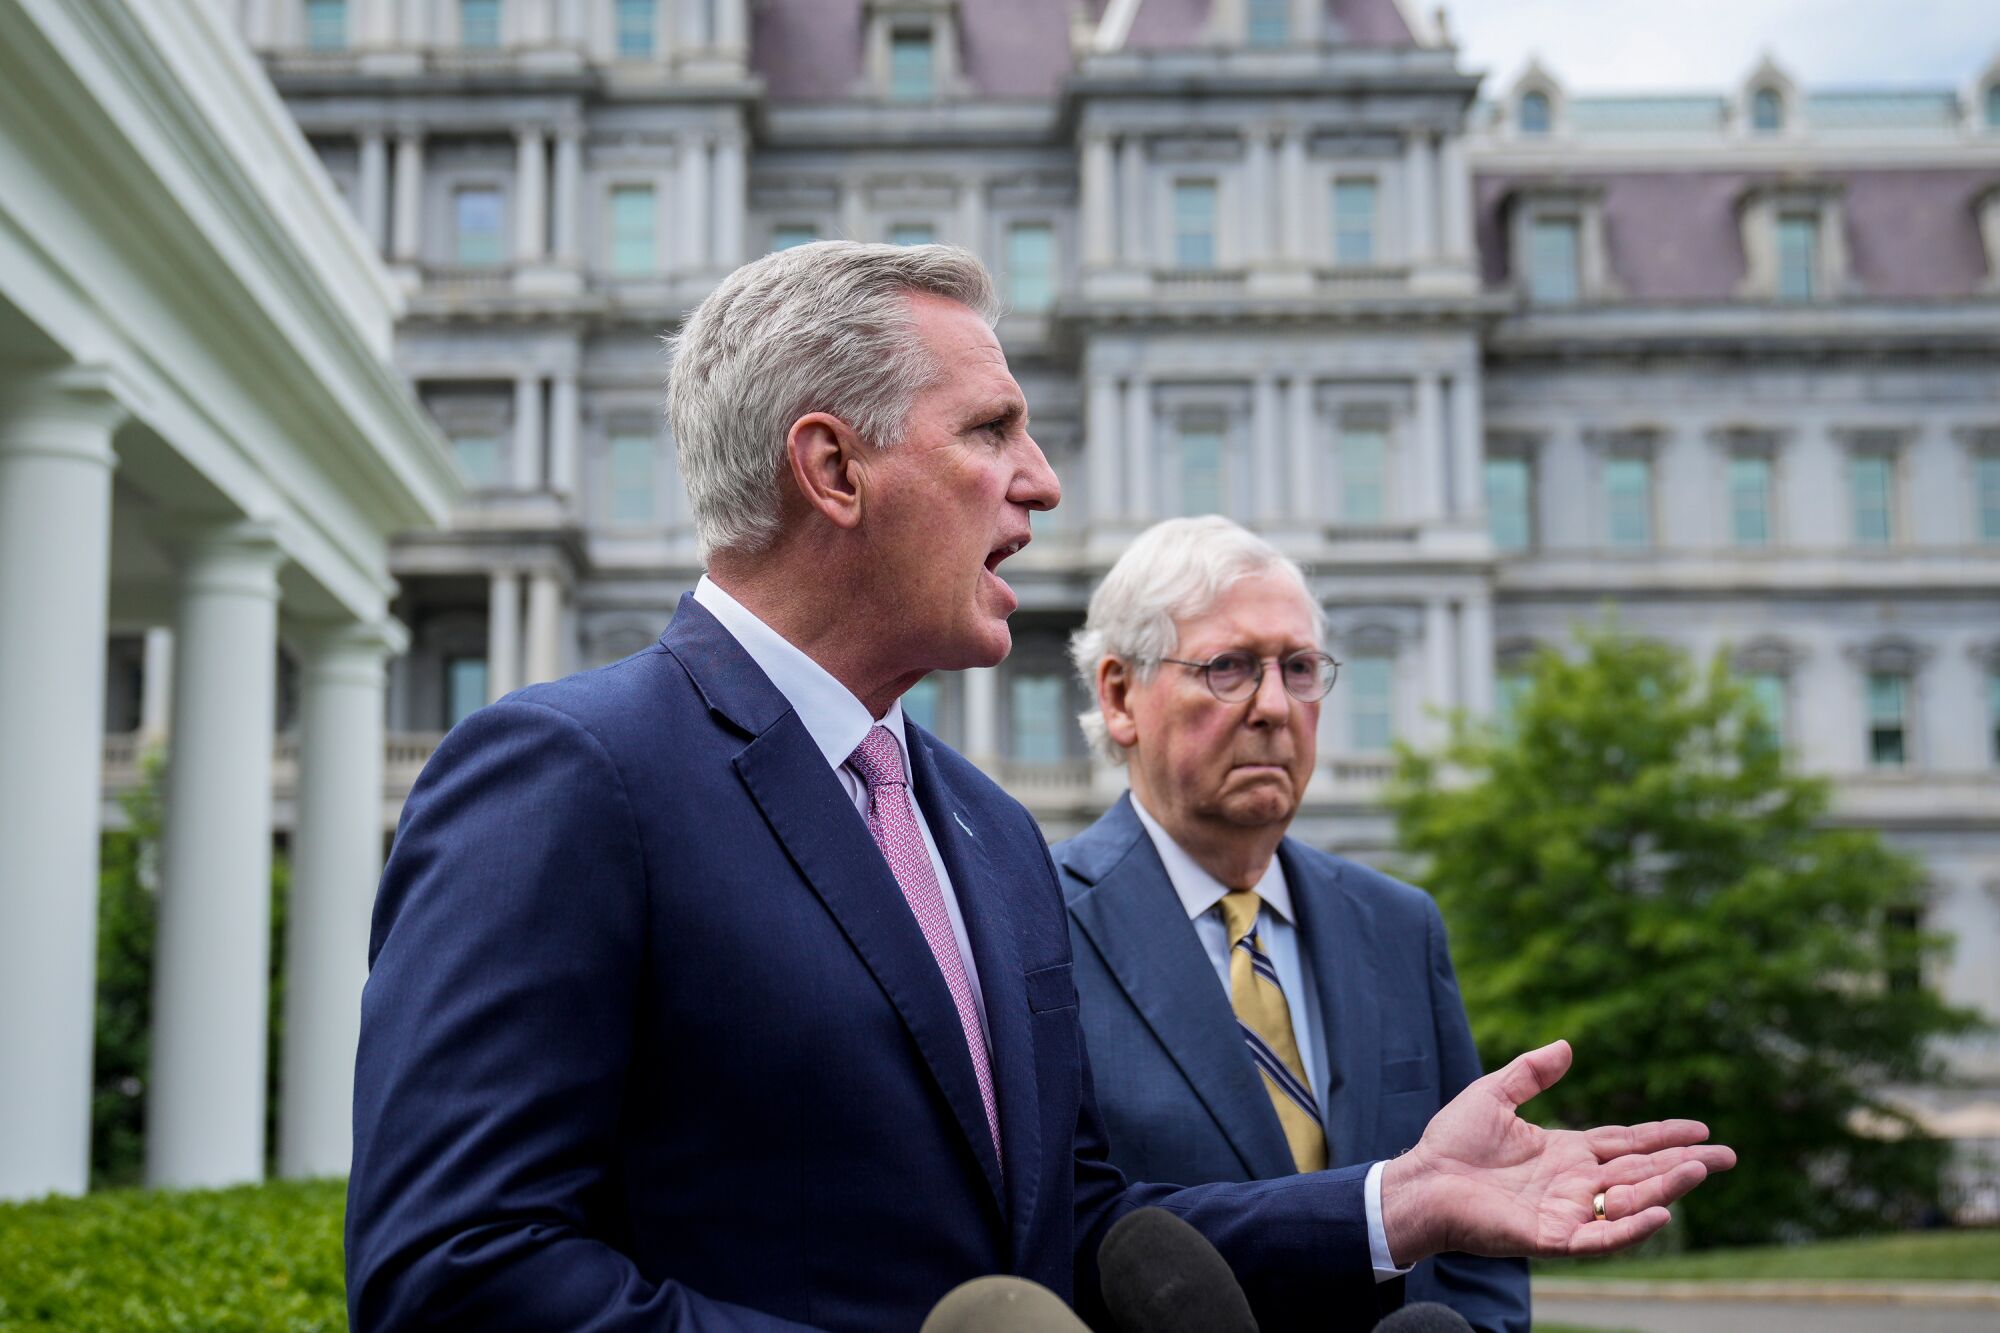 Kevin McCarthy speaks to reporters outside, with Mitch McConnell behind him